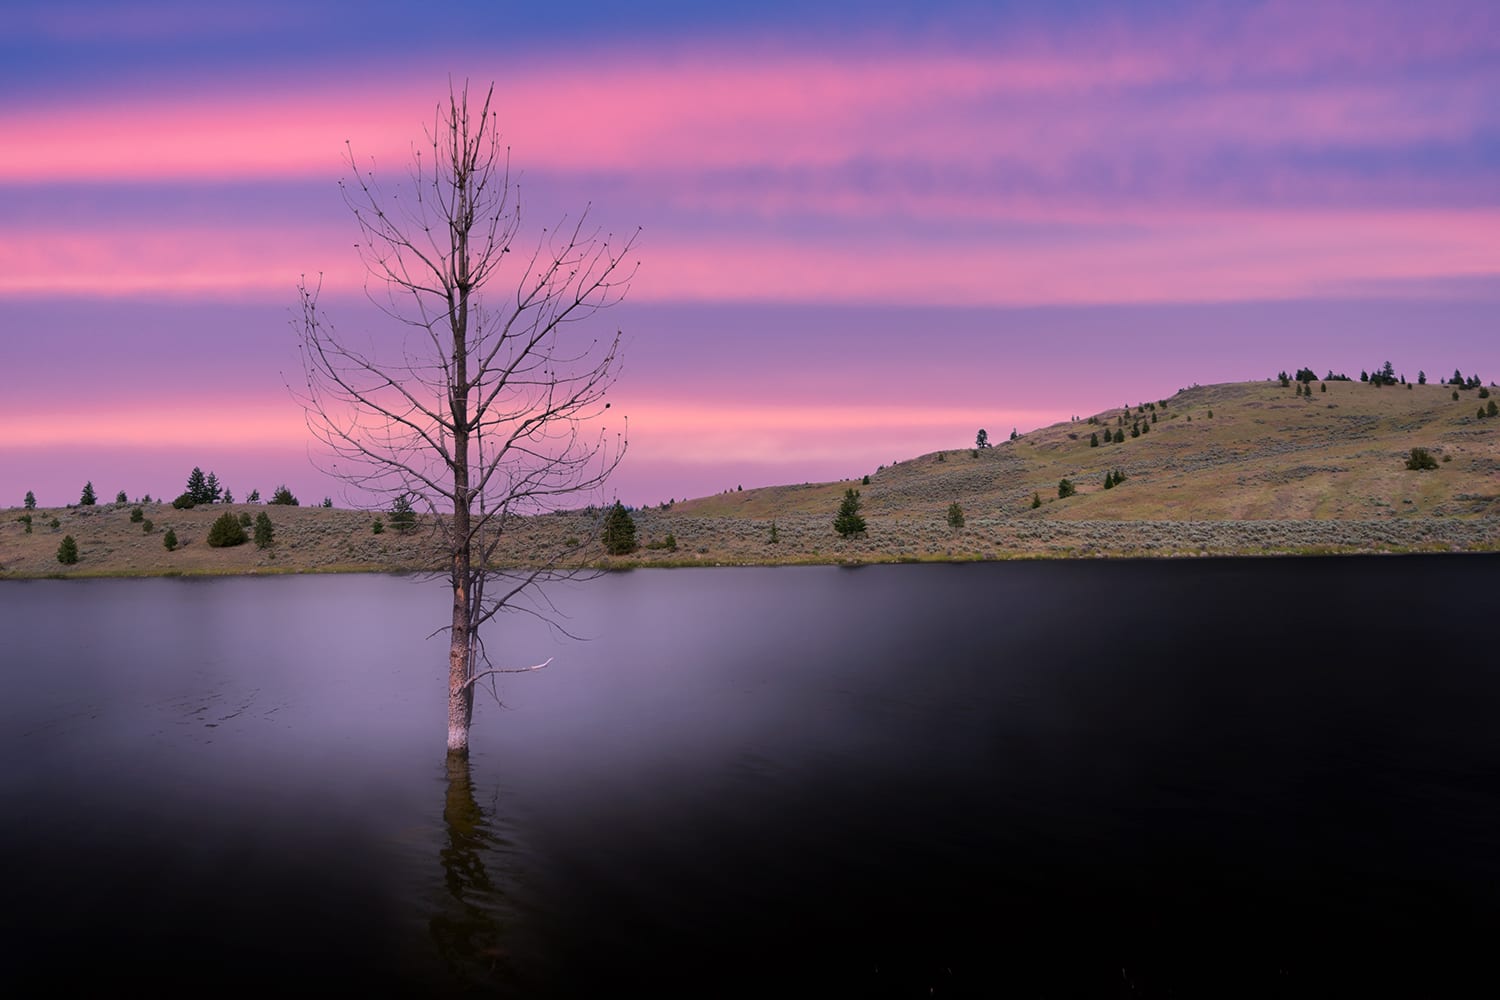 Kamloops Landscape blue and pink sky with a large tree in the middle of a lake with mountain